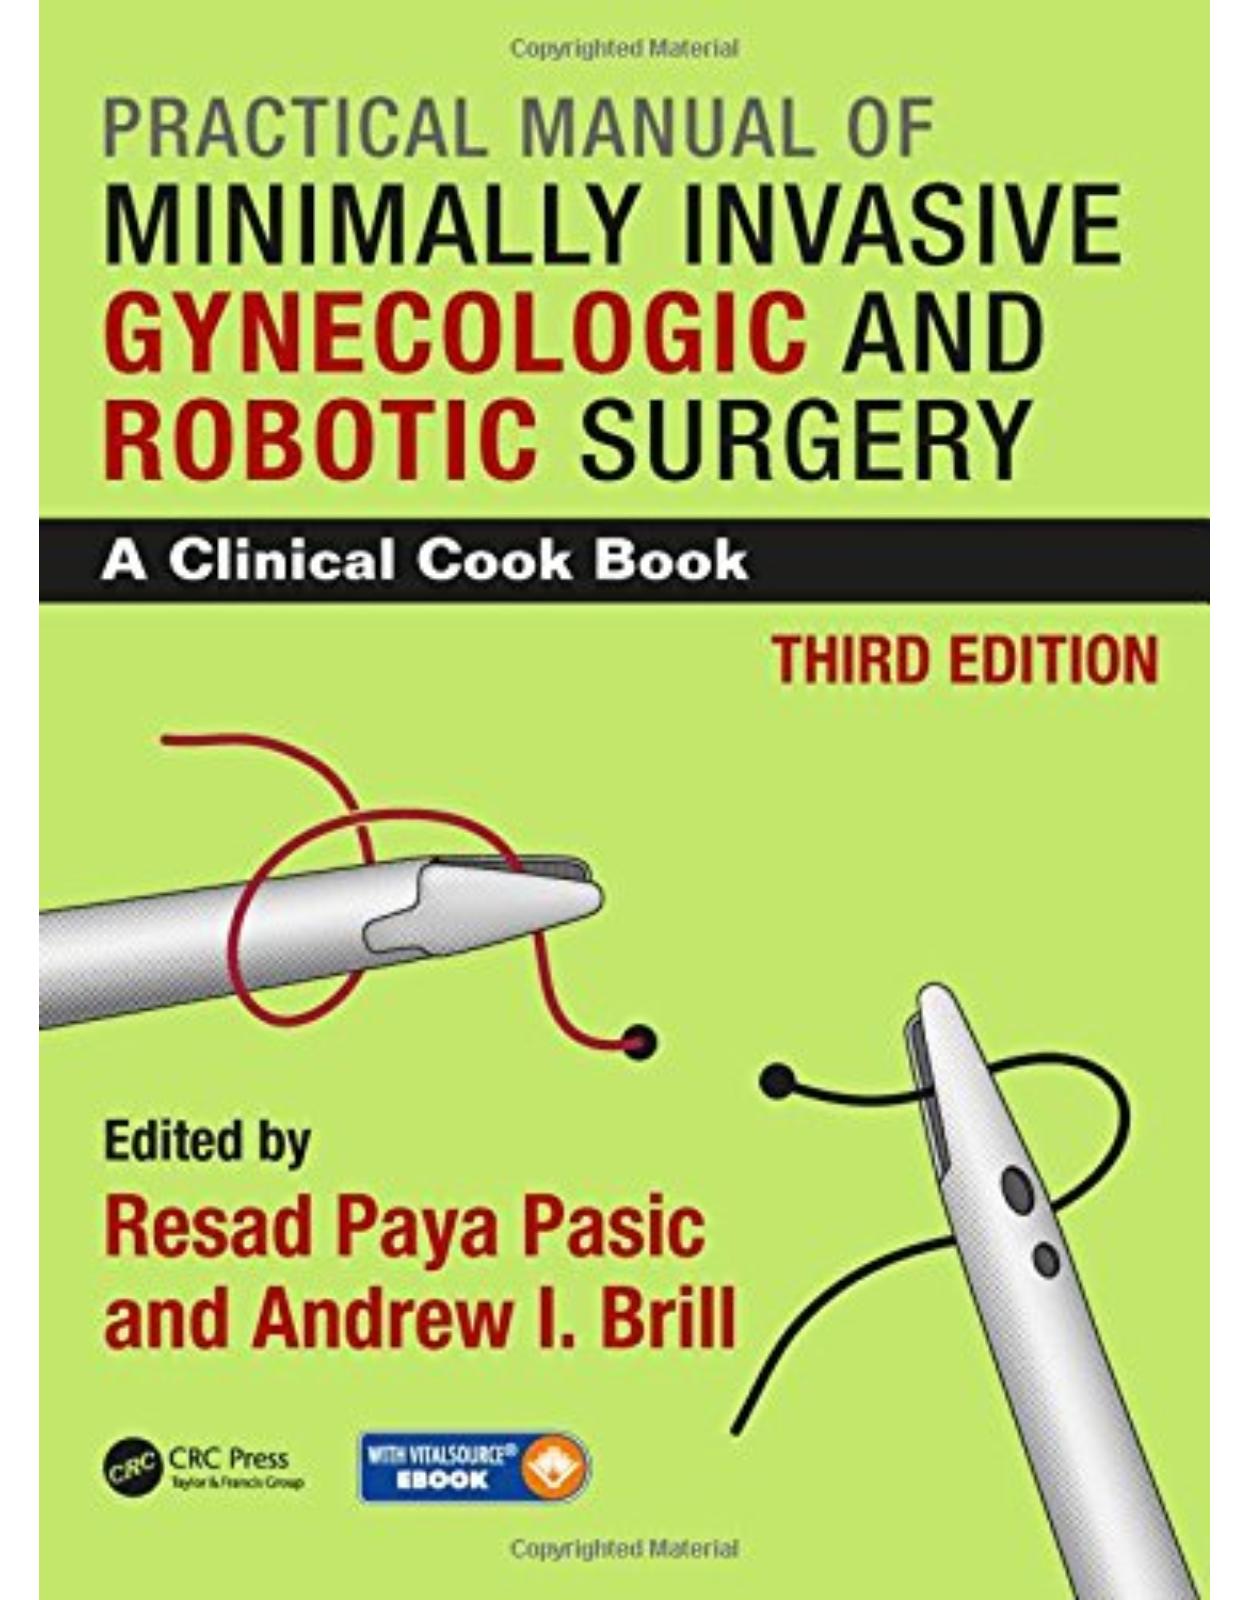 Practical Manual of Minimally Invasive Gynecologic and Robotic Surgery: A Clinical Cook Book 3E